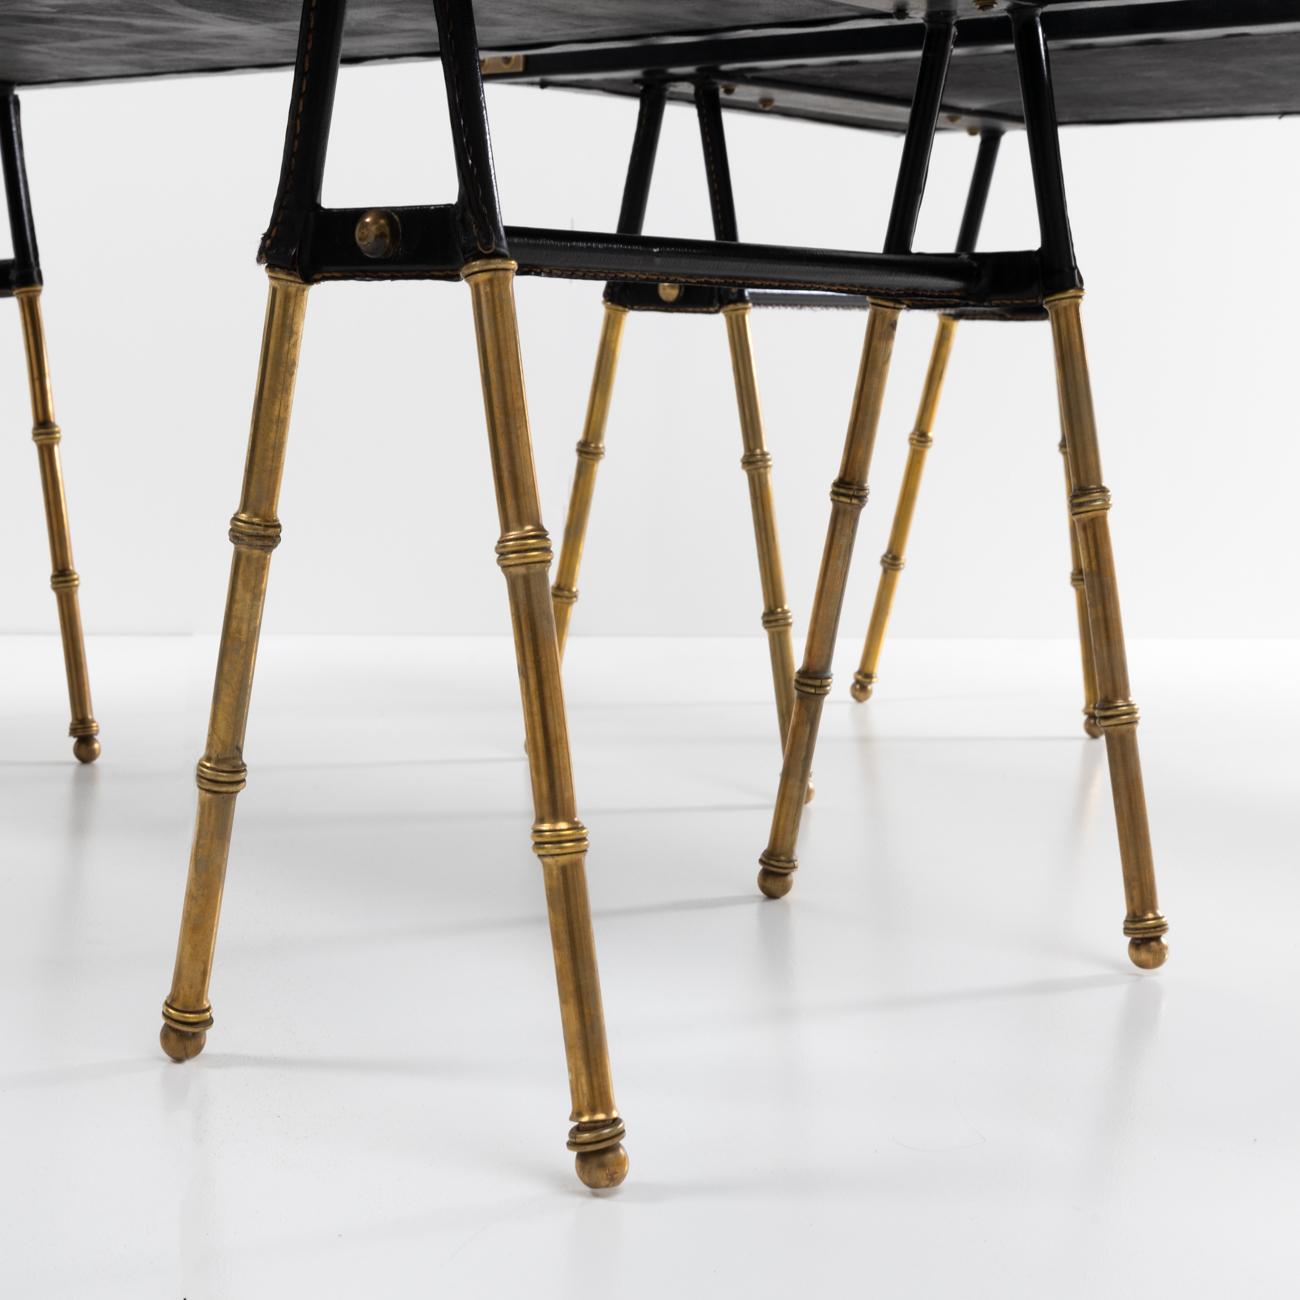 Nice pair of cocktail tables or end tables in solid copper with faux bamboo decor, the upper part covered with saddle stitching leather. 
The legs are surmounted by a leather tabletop and decorated with accessories. 
The tables are entirely made